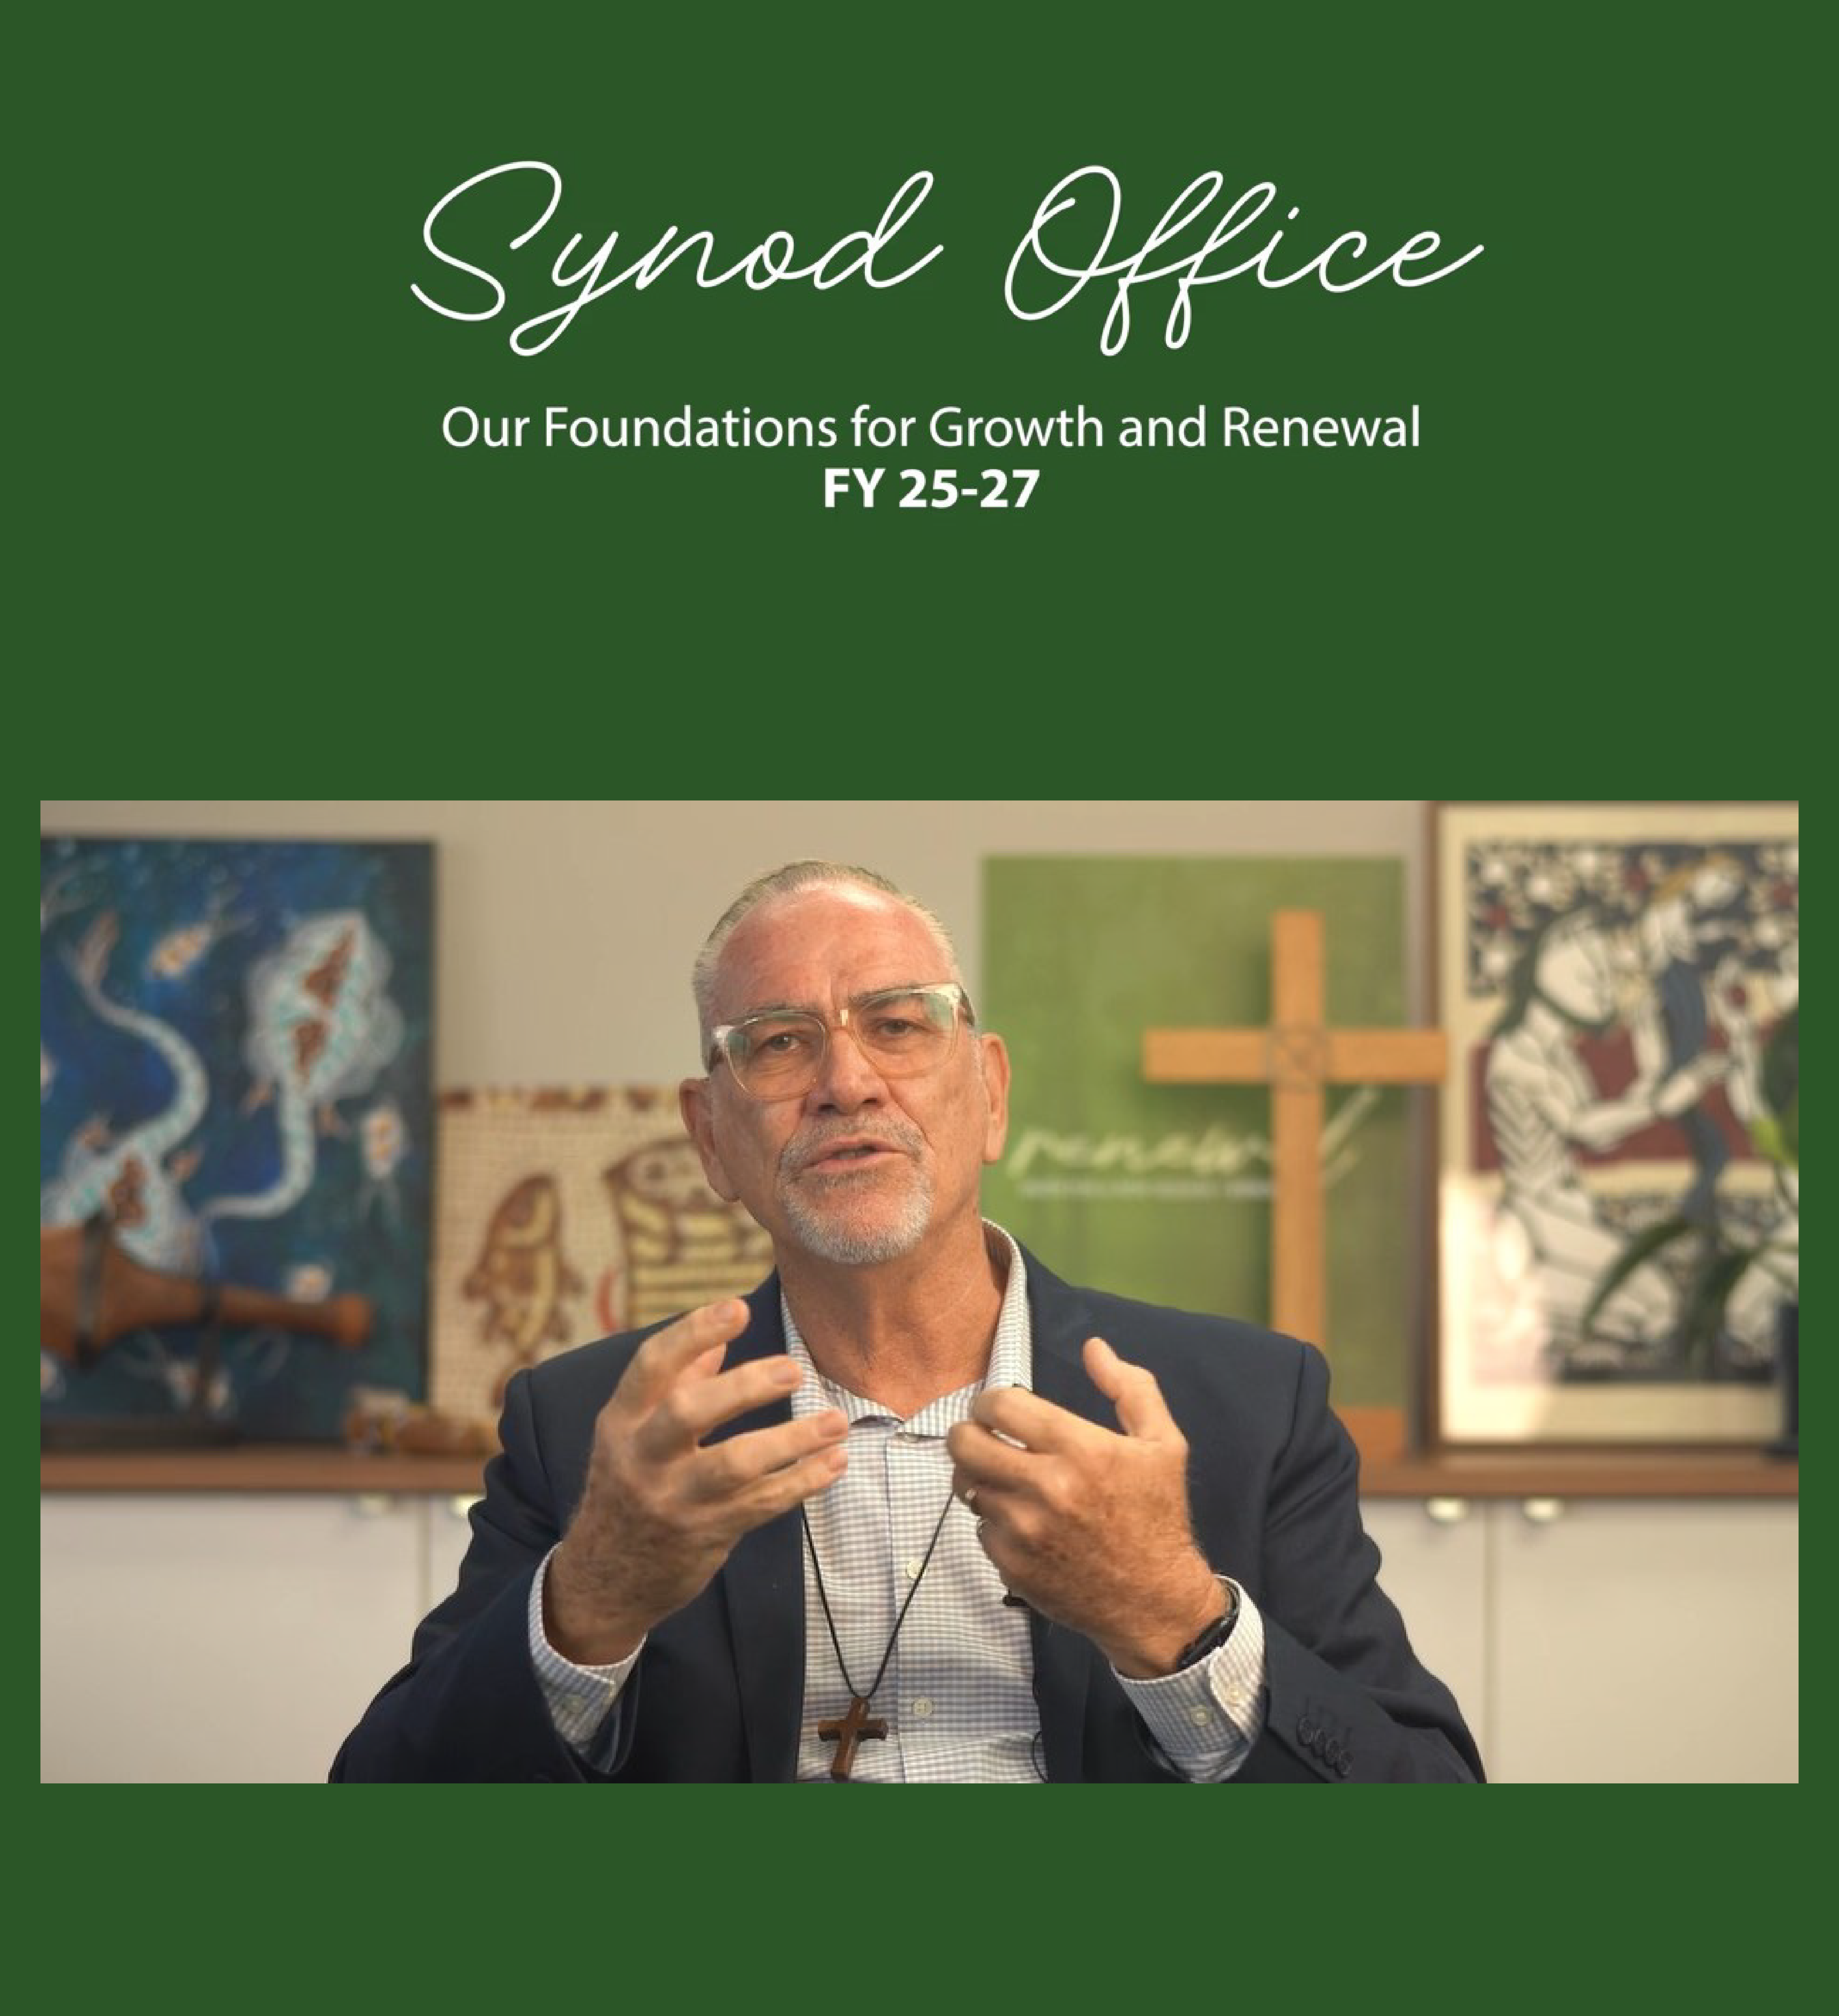 Video: Synod Office - Foundations for Renewal and Growth Image